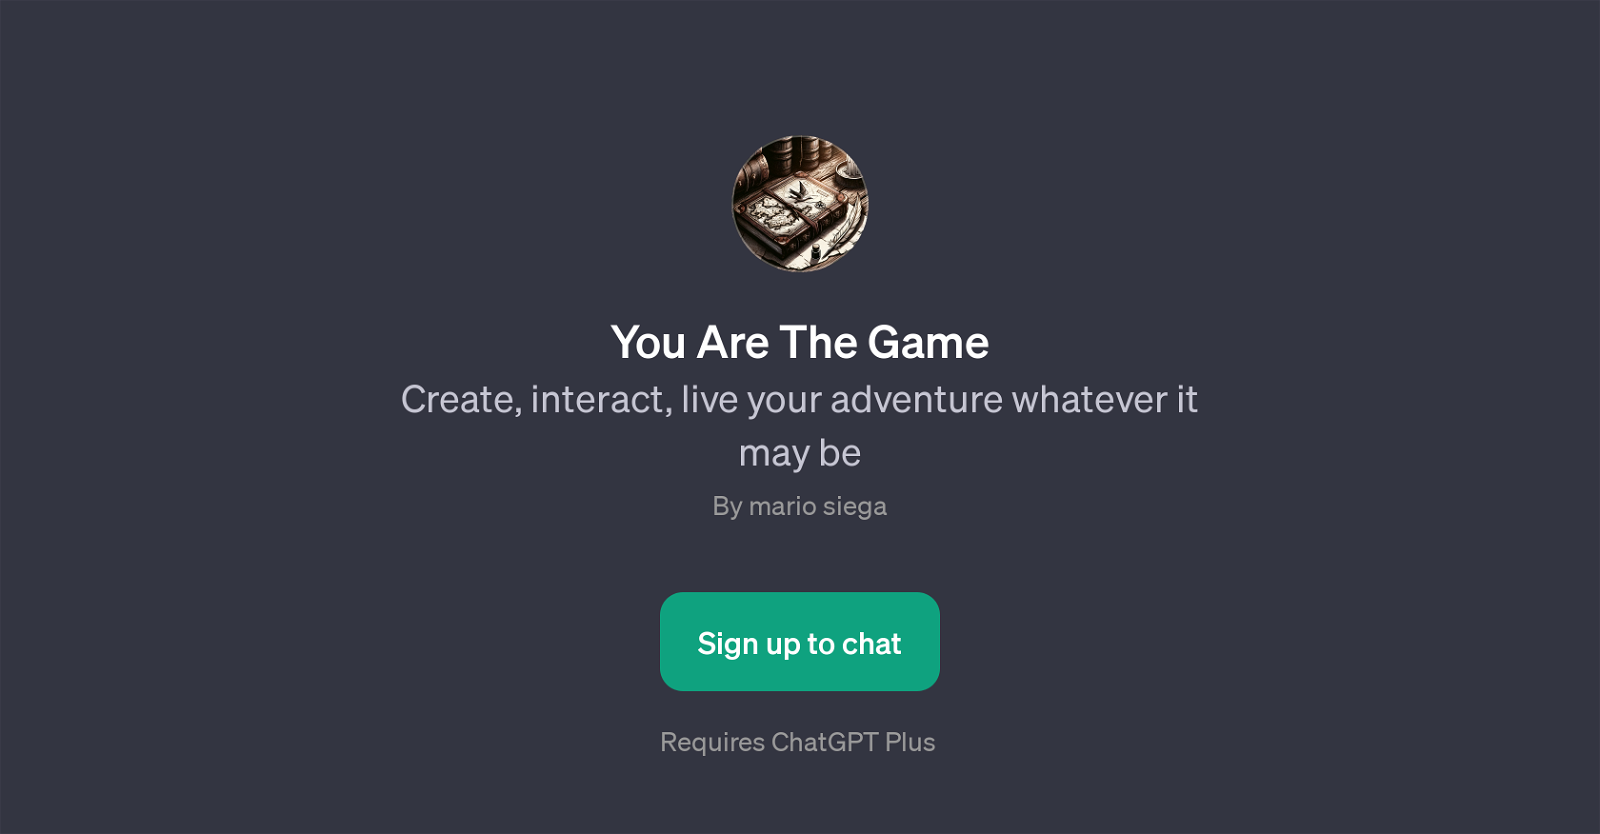 You Are The Game website